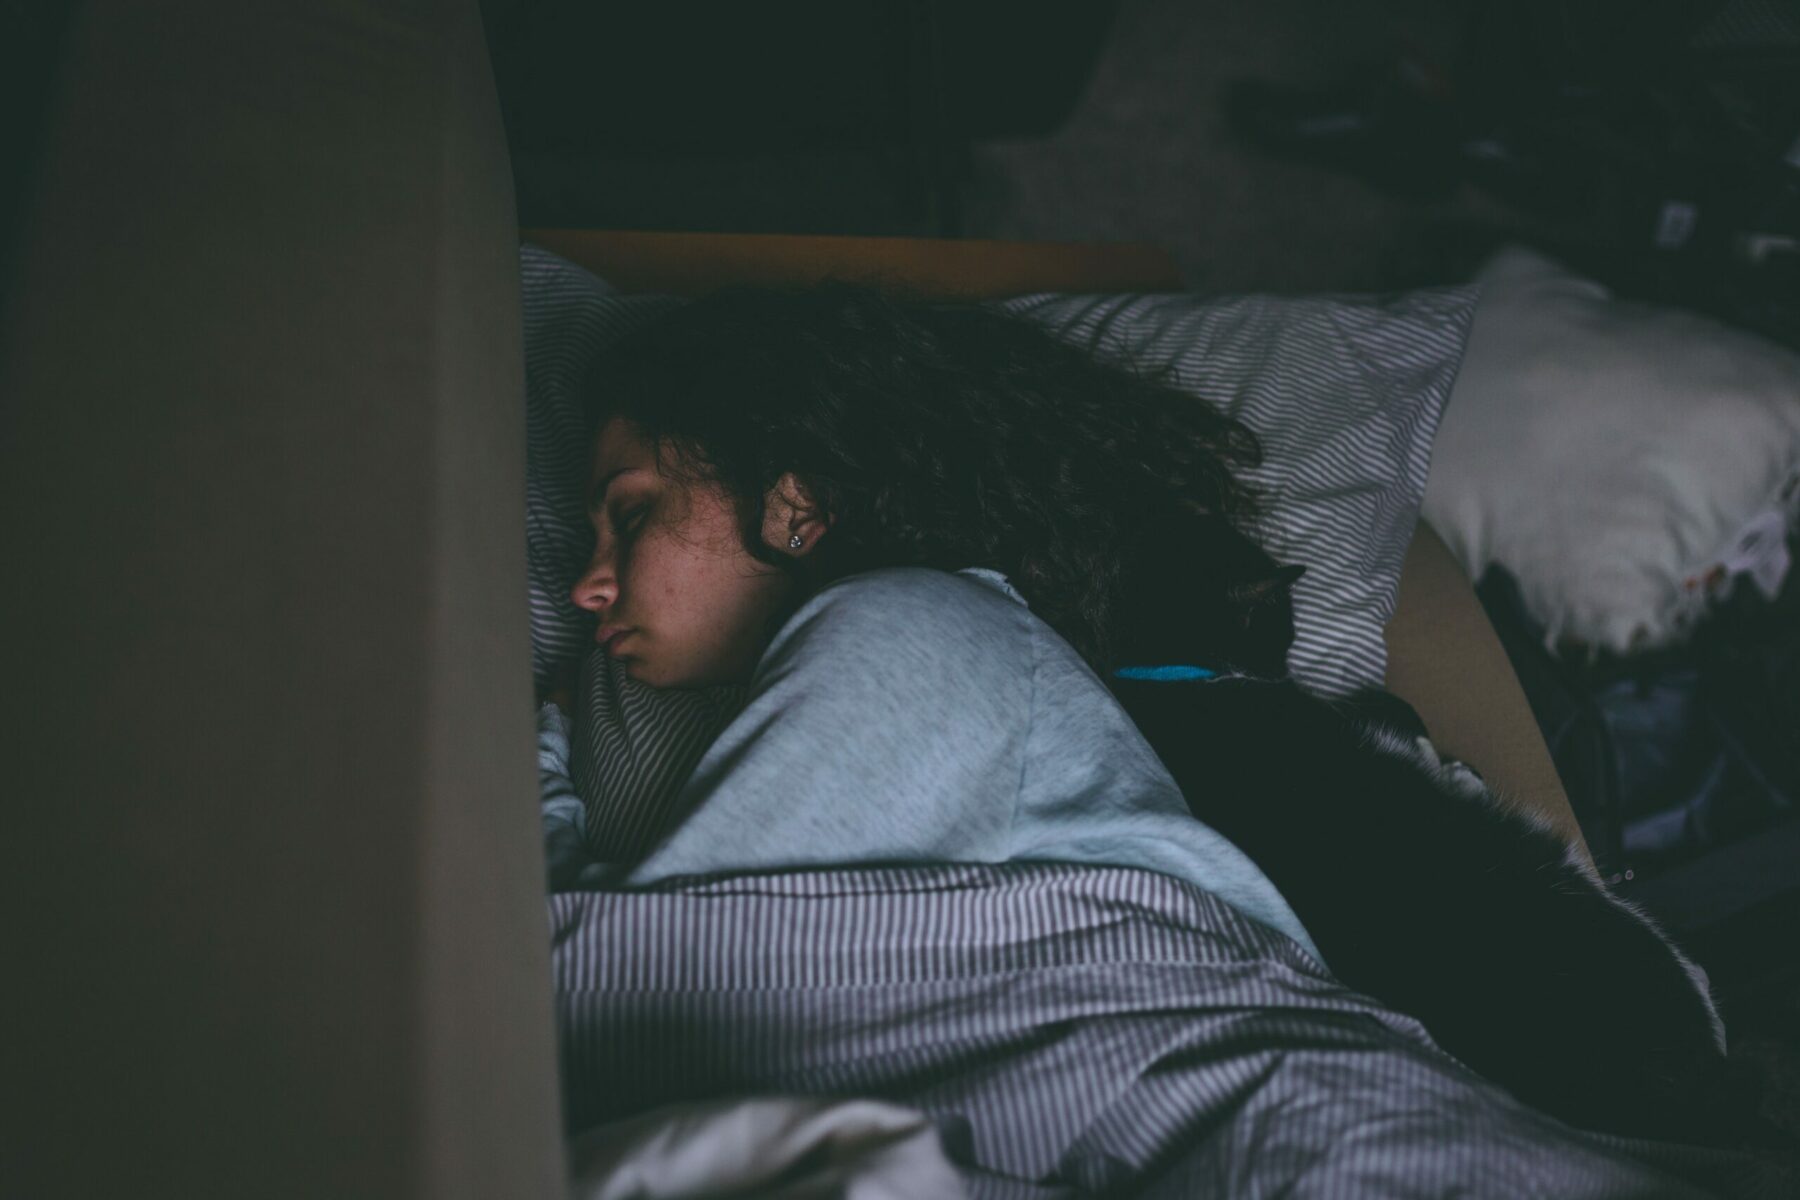 A woman in bed asleep.